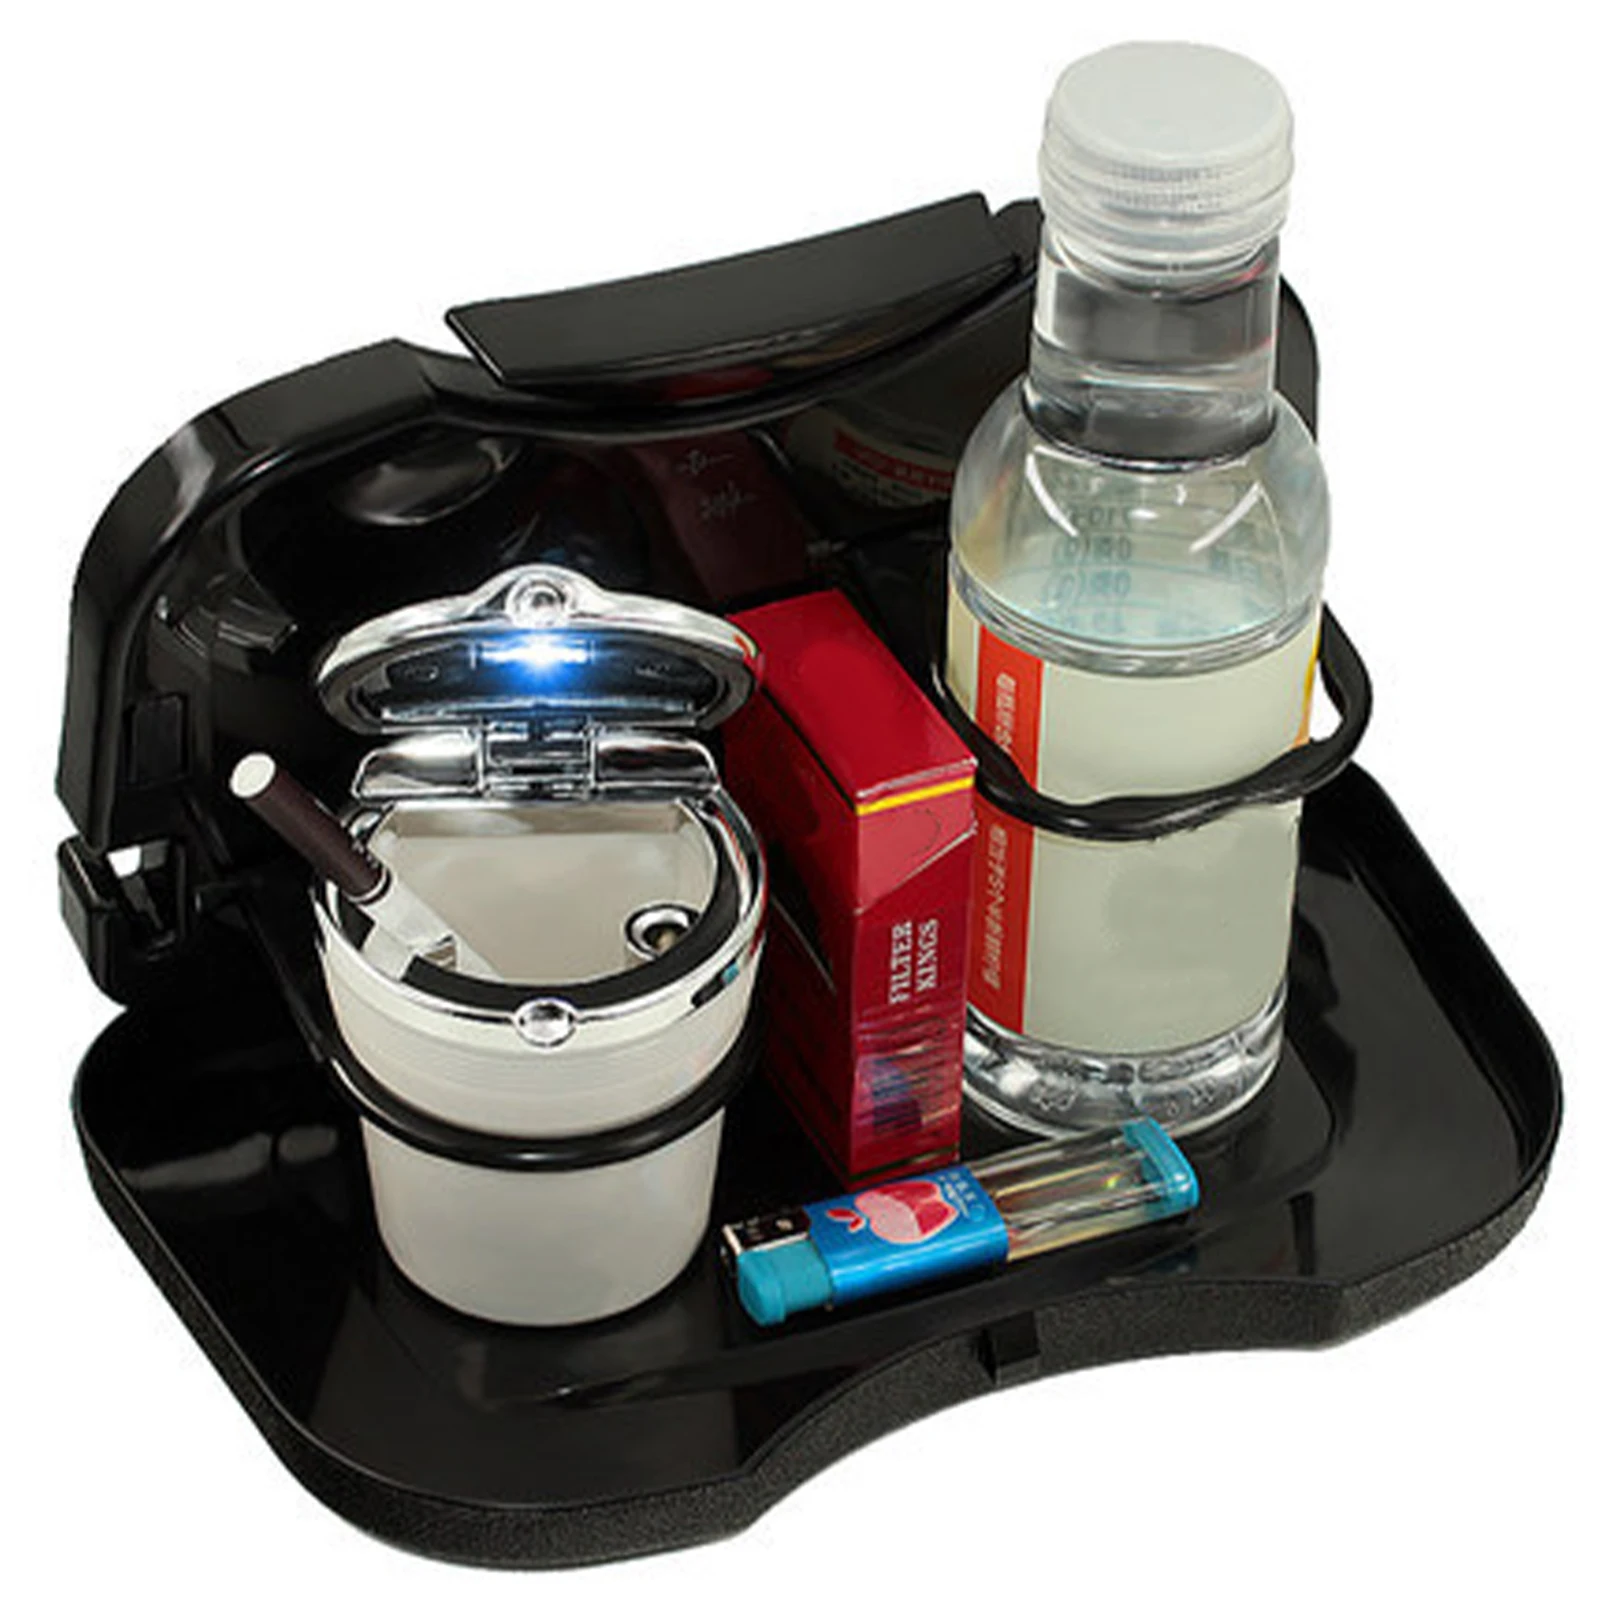 

Multi-Functional Car Backseat Tray Car Trays For Eating Kids Road Trip Lunch With Cup Holder Auto Food And Drink Tray For Eating